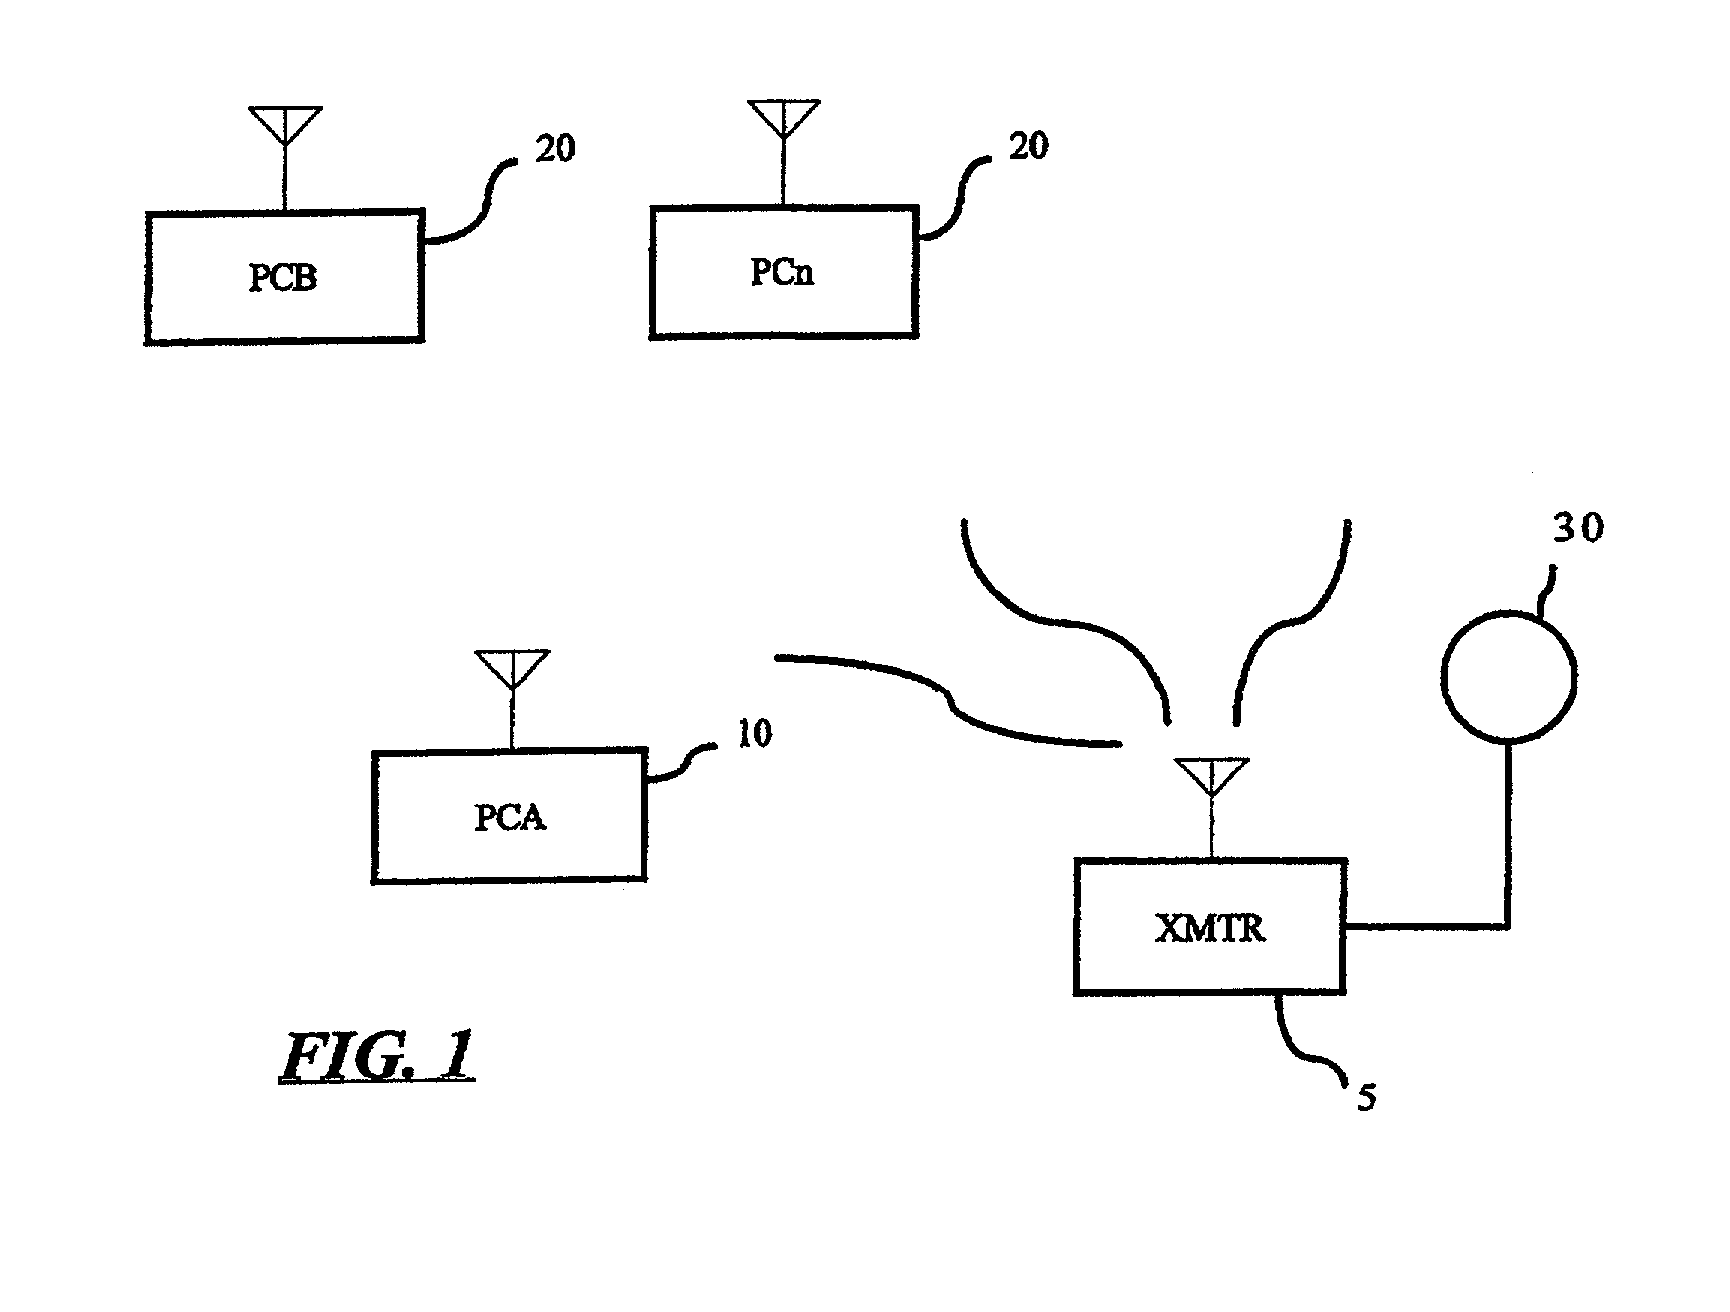 Method to synchronize playback of multicast audio streams on a local network